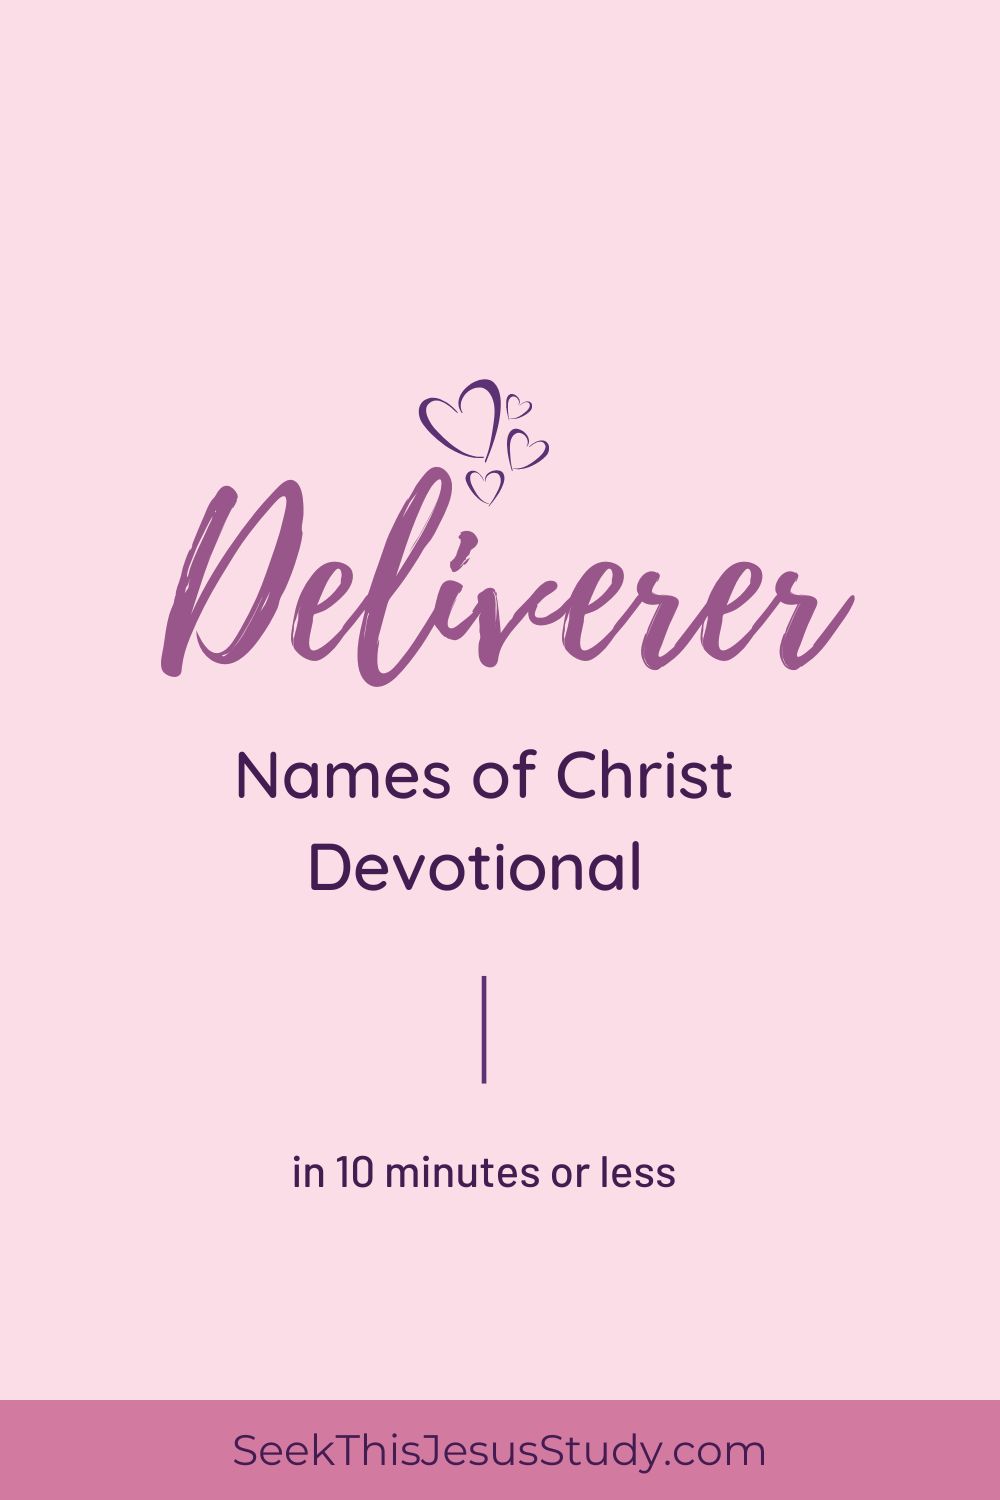 Deliverer: “Keeping Christ in Christmas” 2021 Daily Devotional Day 7 ...